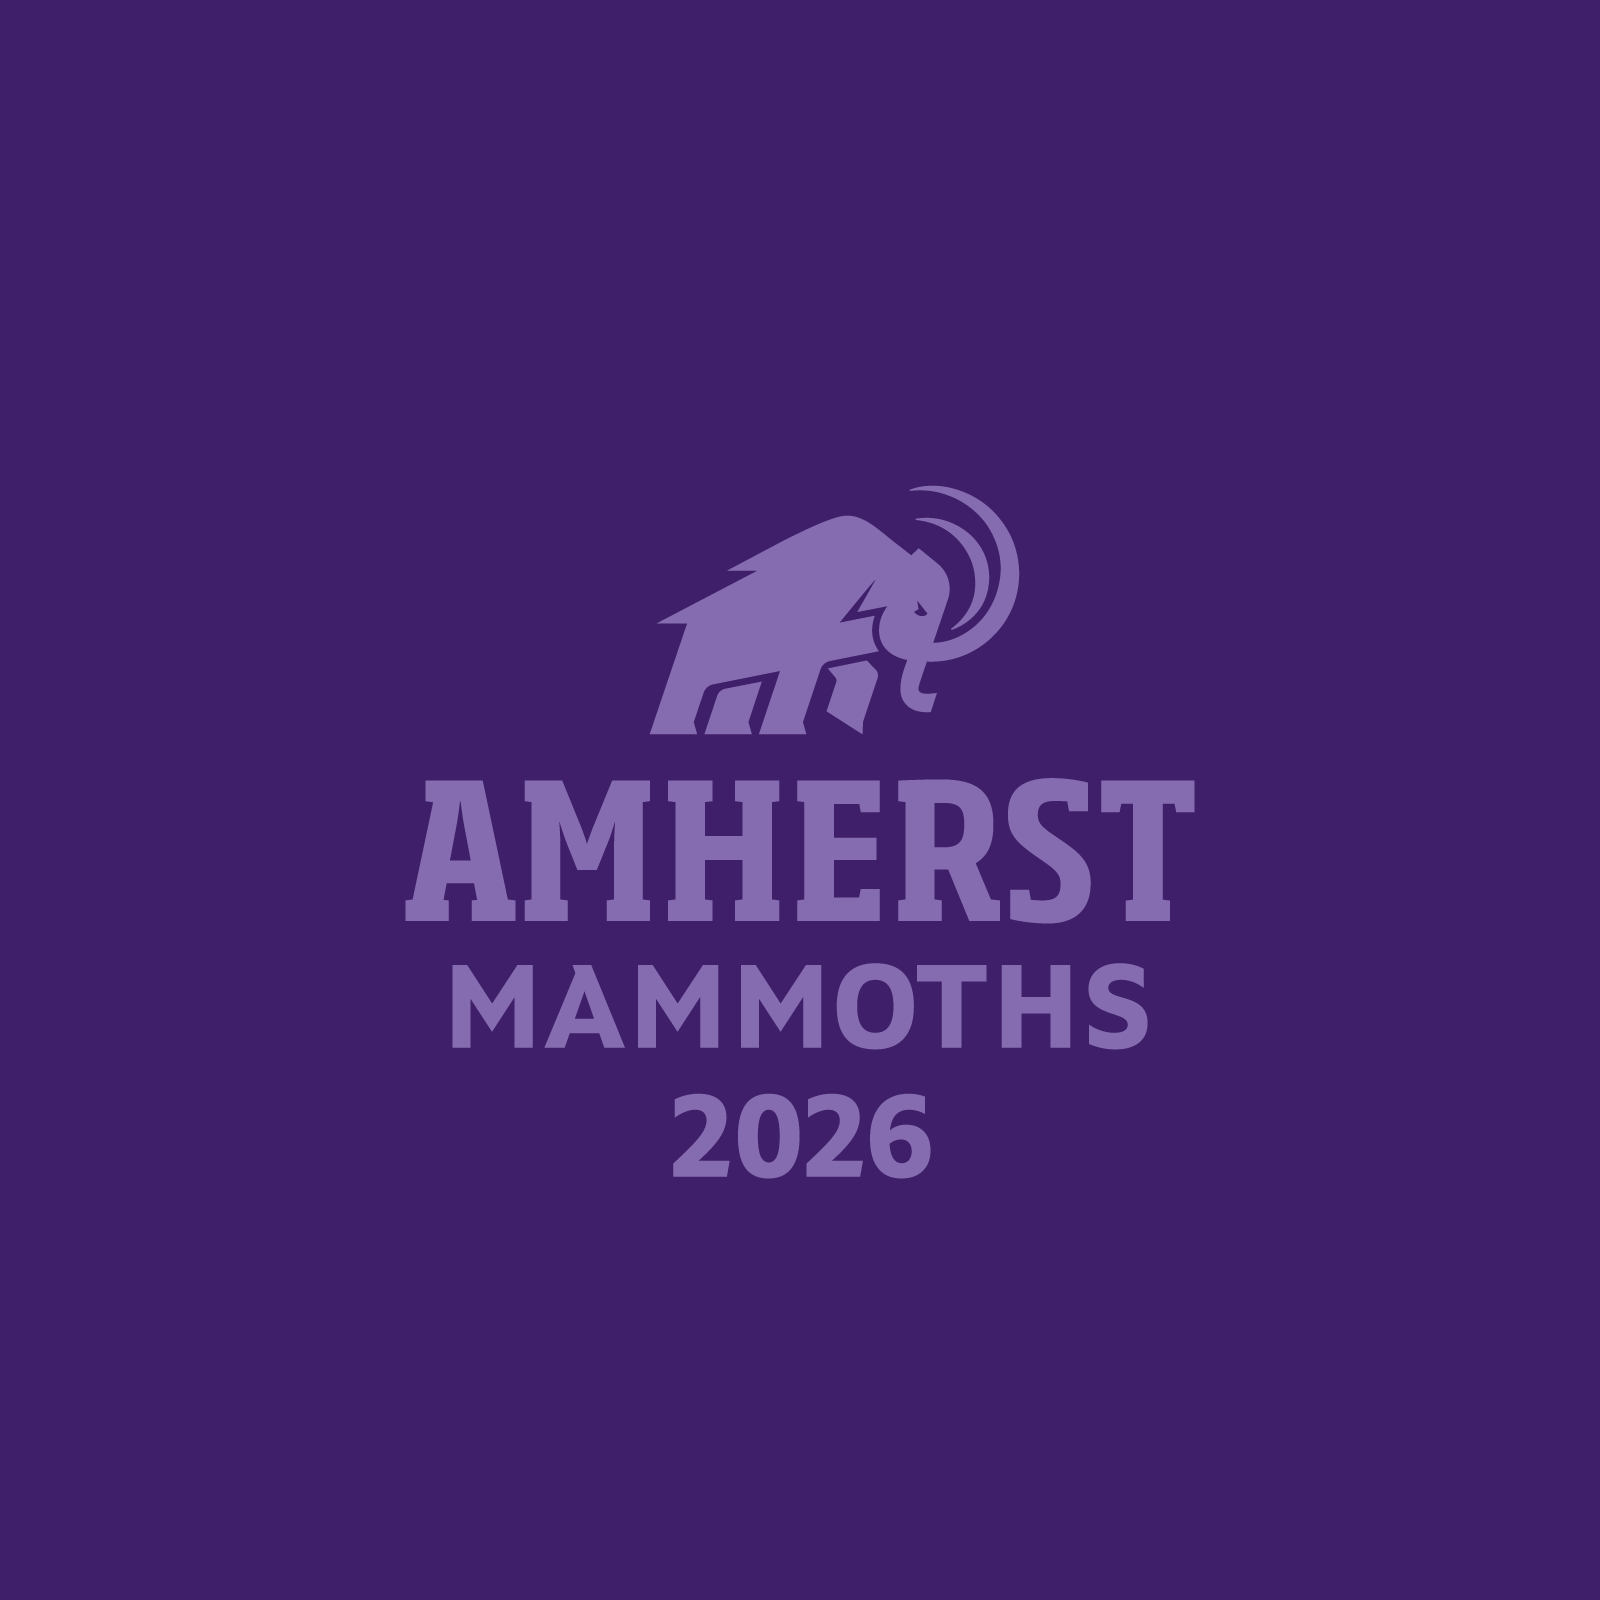 Mammoth on purple background with Amherst Mammoths lettering and Class of 2026